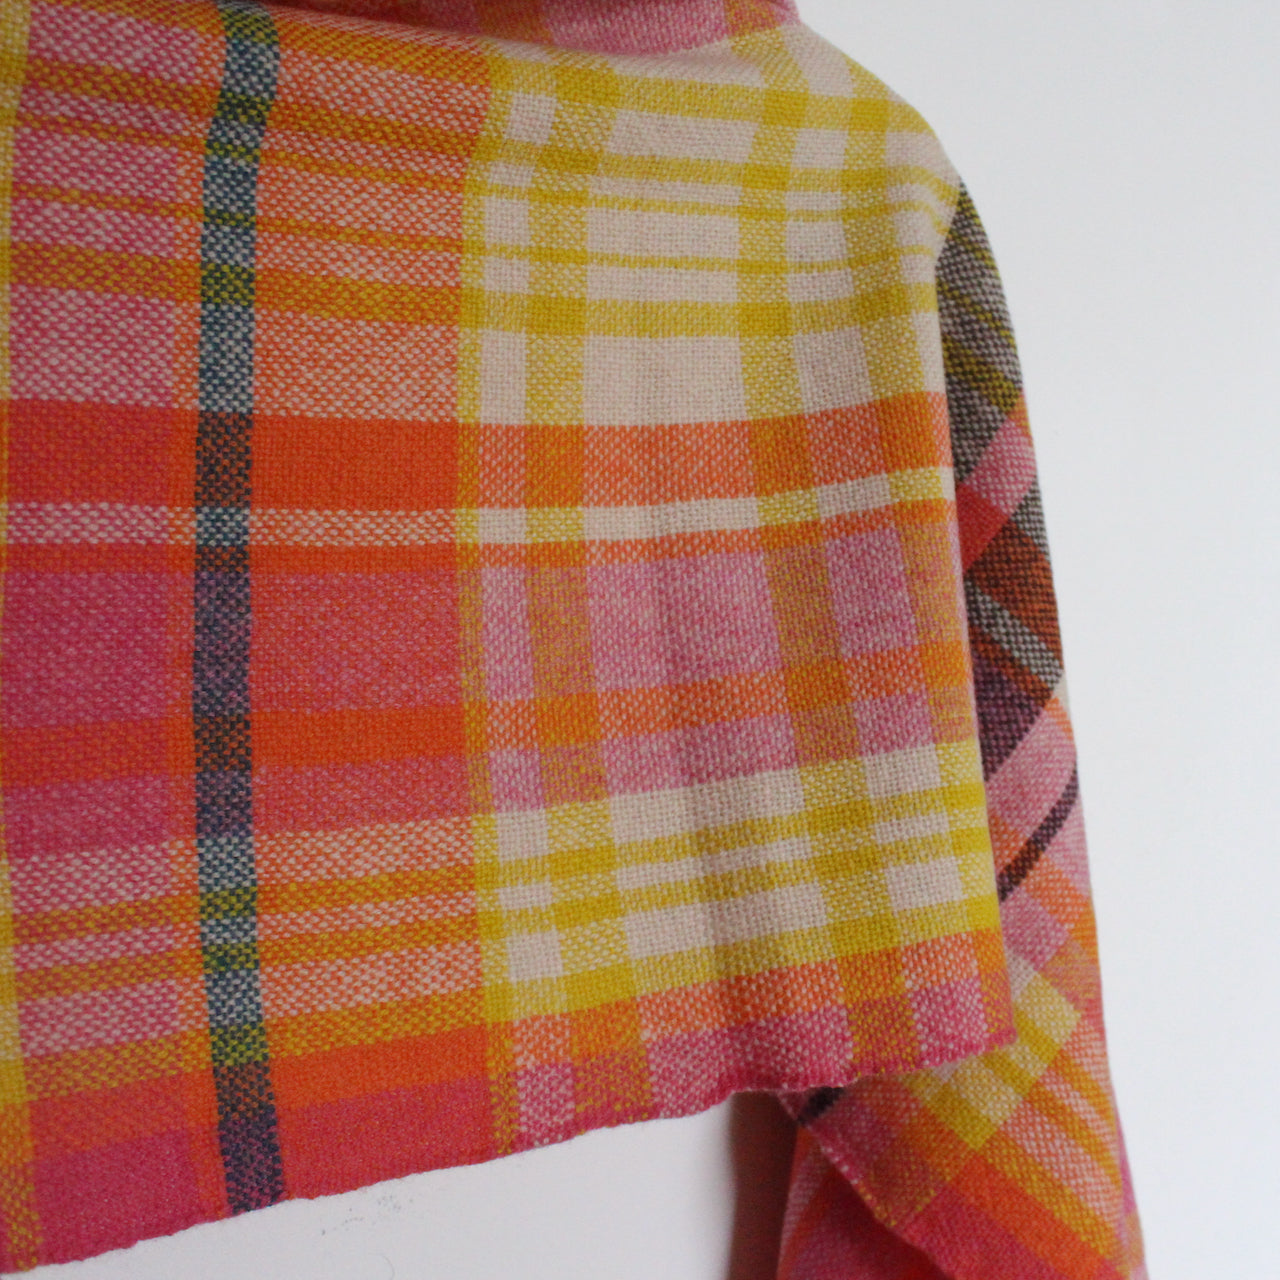 A handwoven woollen scarf by Teresa Dunne Cornish weaver in pink, cream, orange and yellow